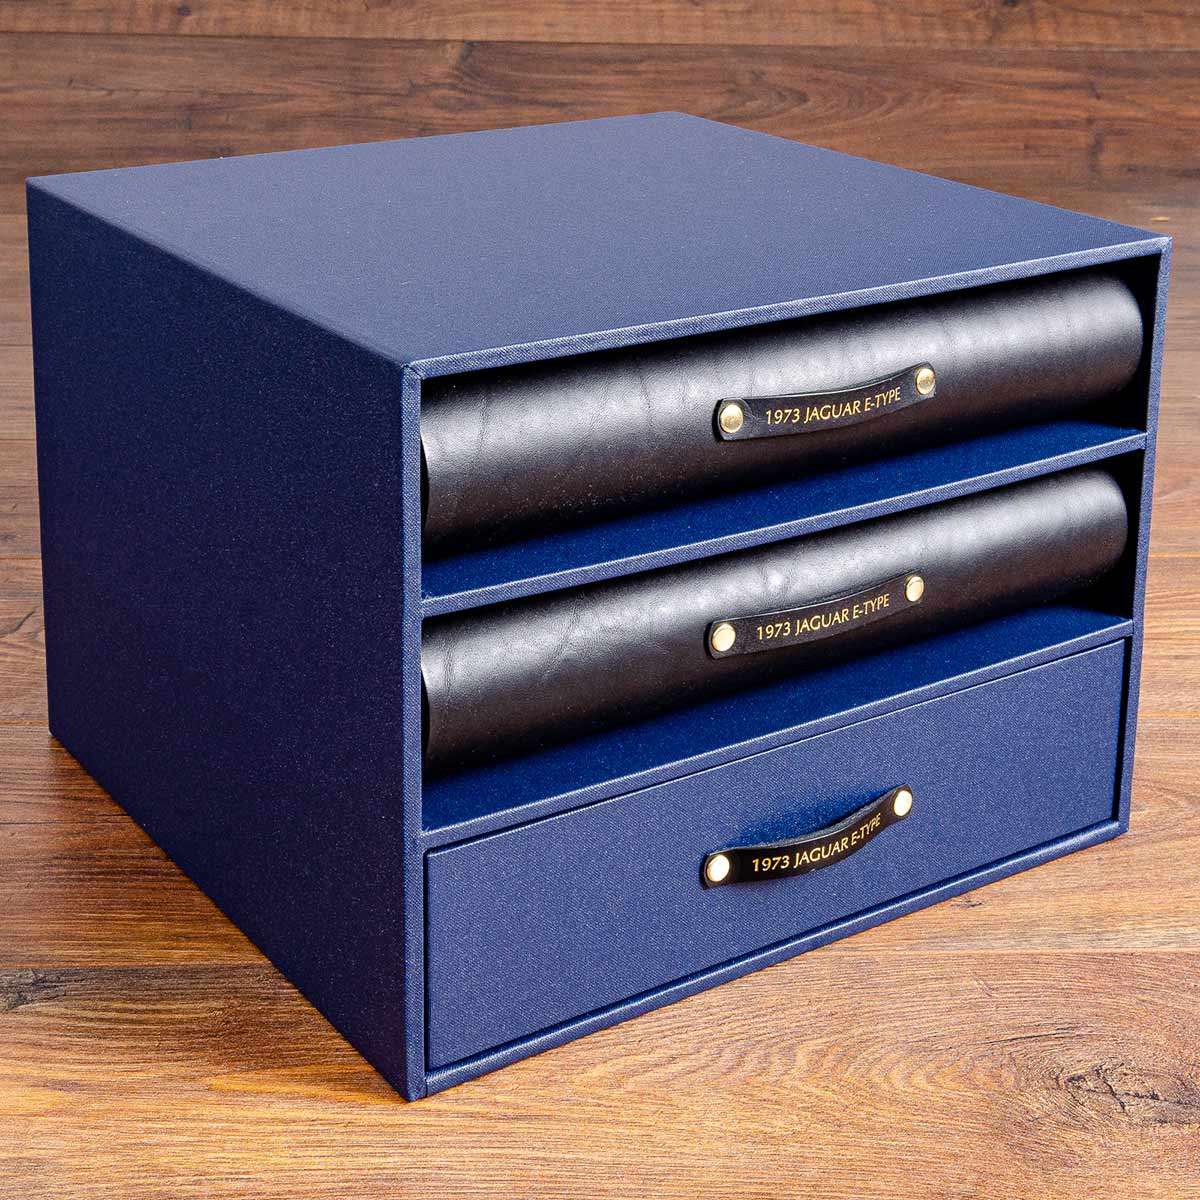 Slipcase box with black leather binders for Jaguar E type documents